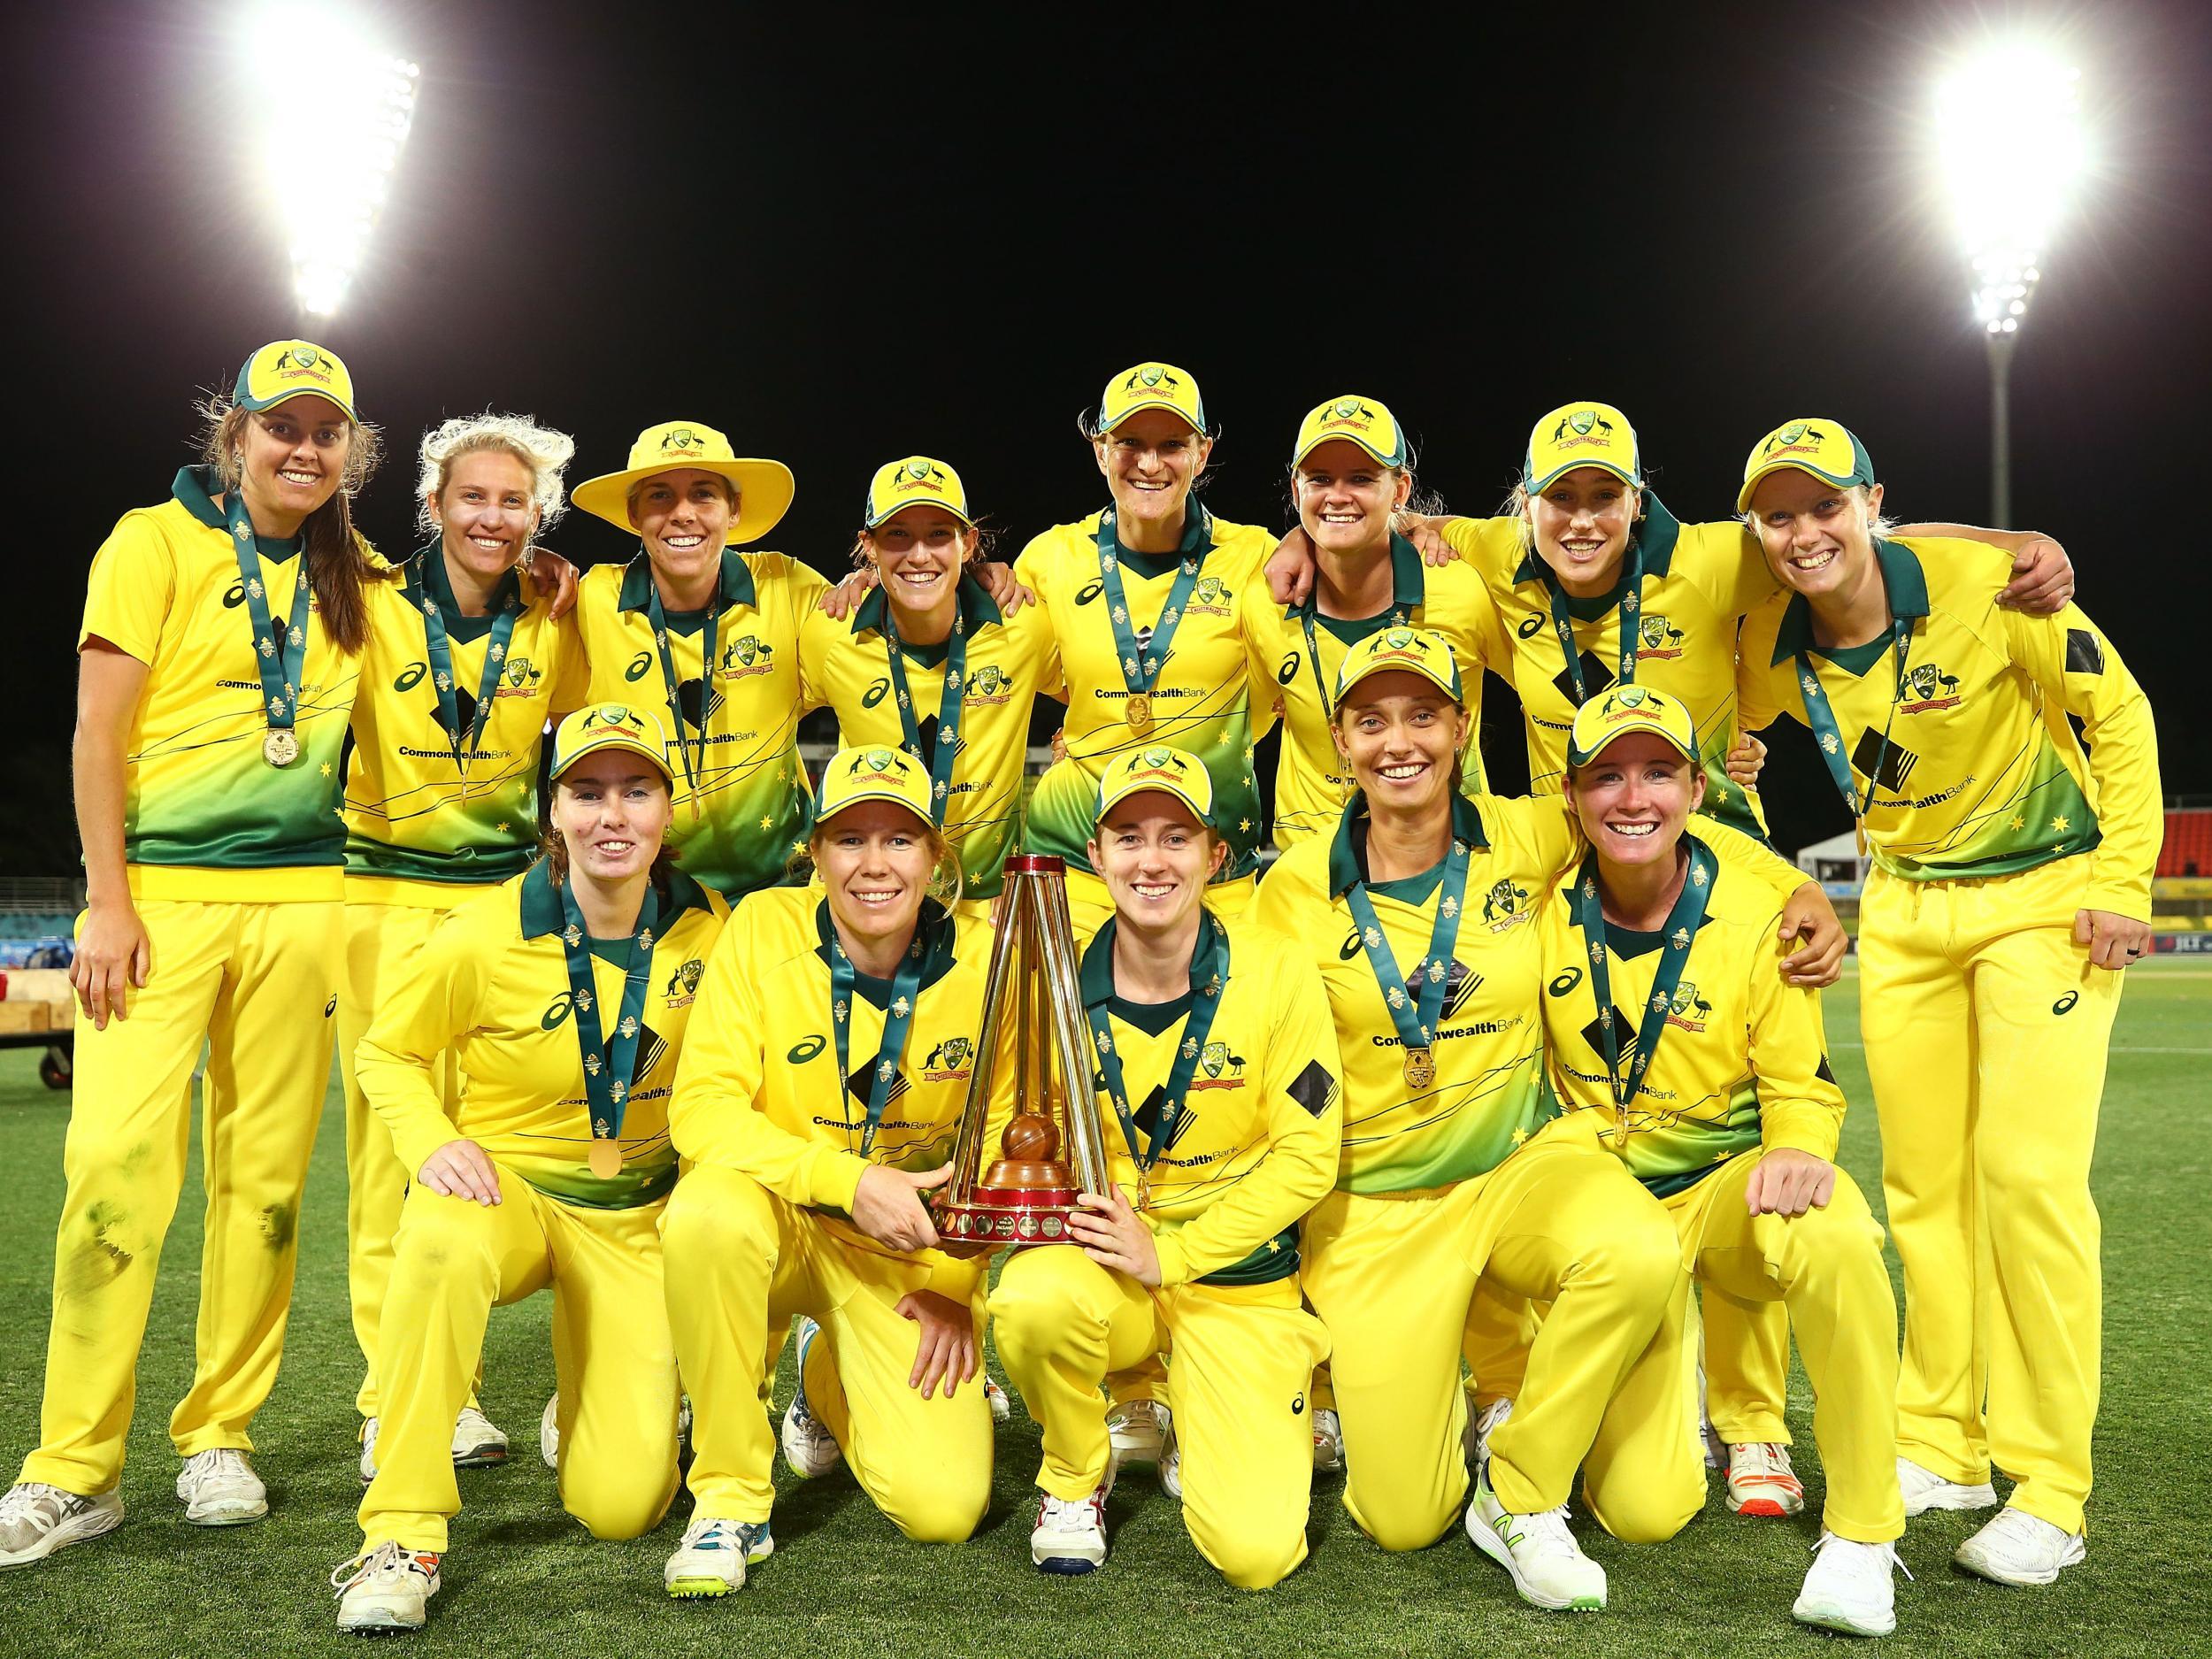 Women's cricket has made great strides in T20